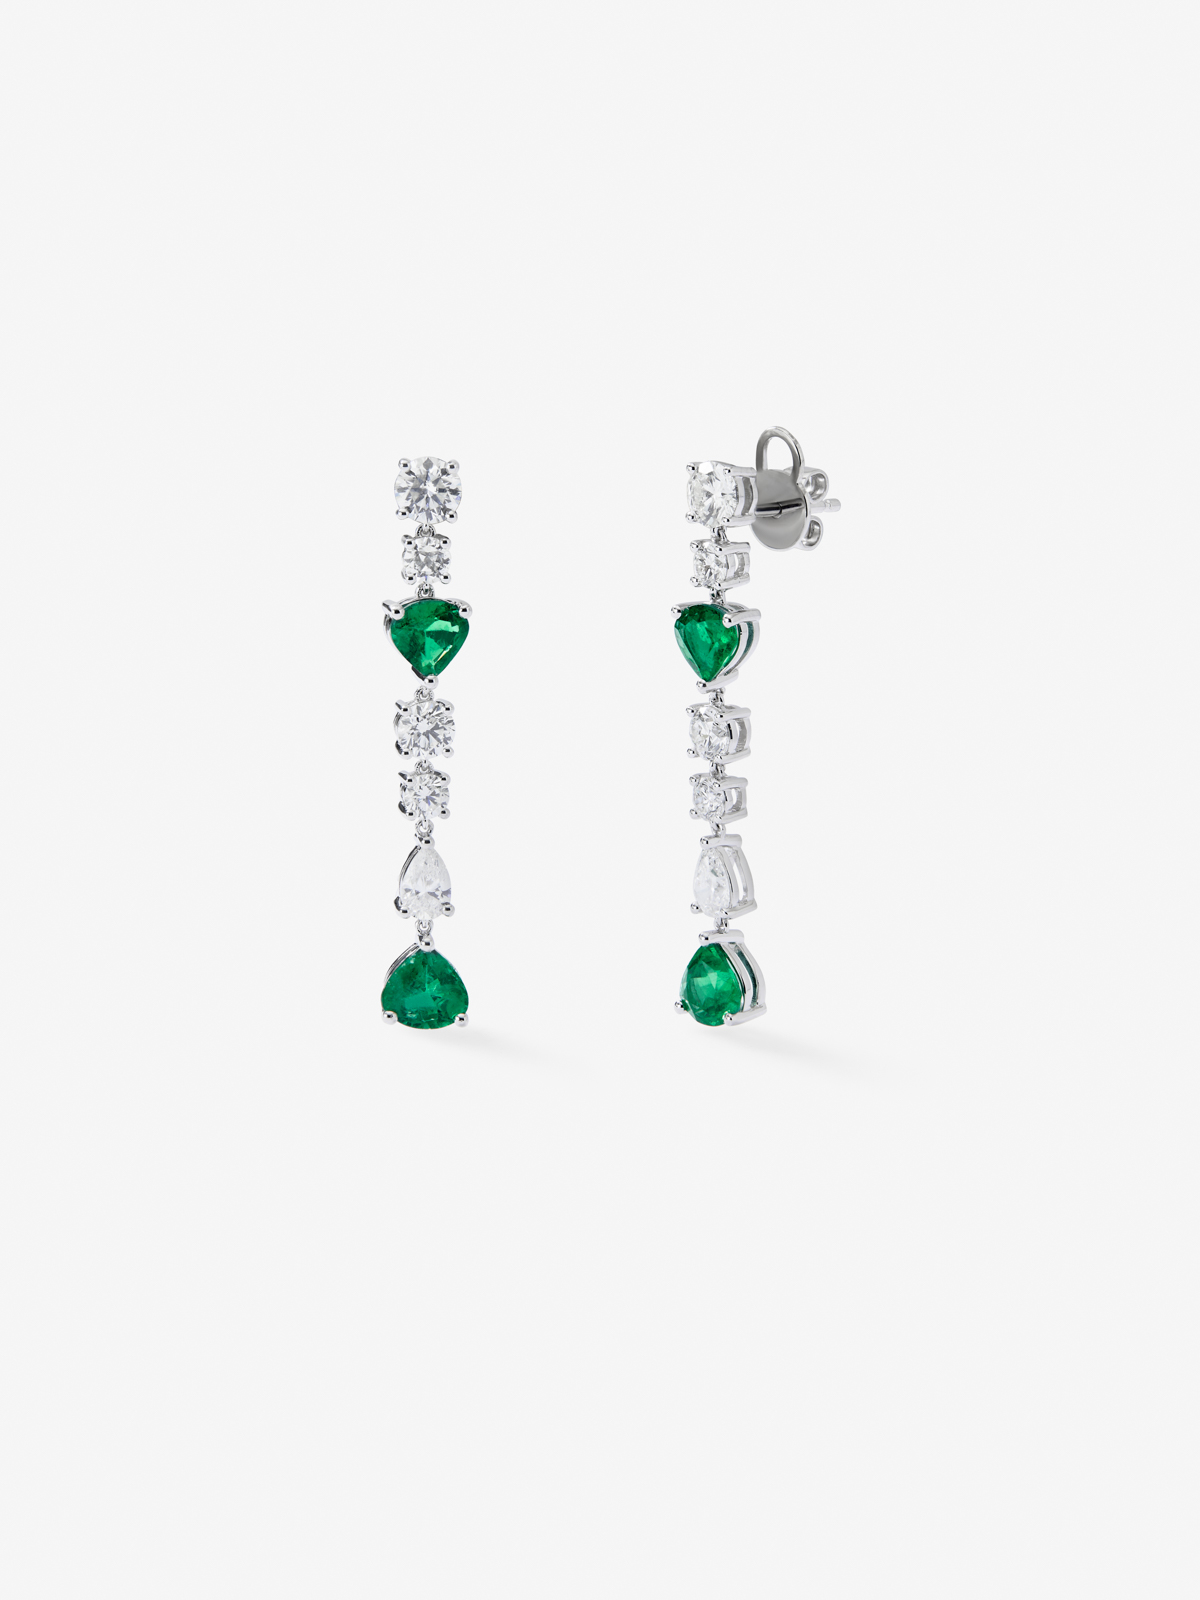 18K white gold pending with green emeralds in 1.91 cts and white diamonds in pear and bright diamonds of 1.93 cts